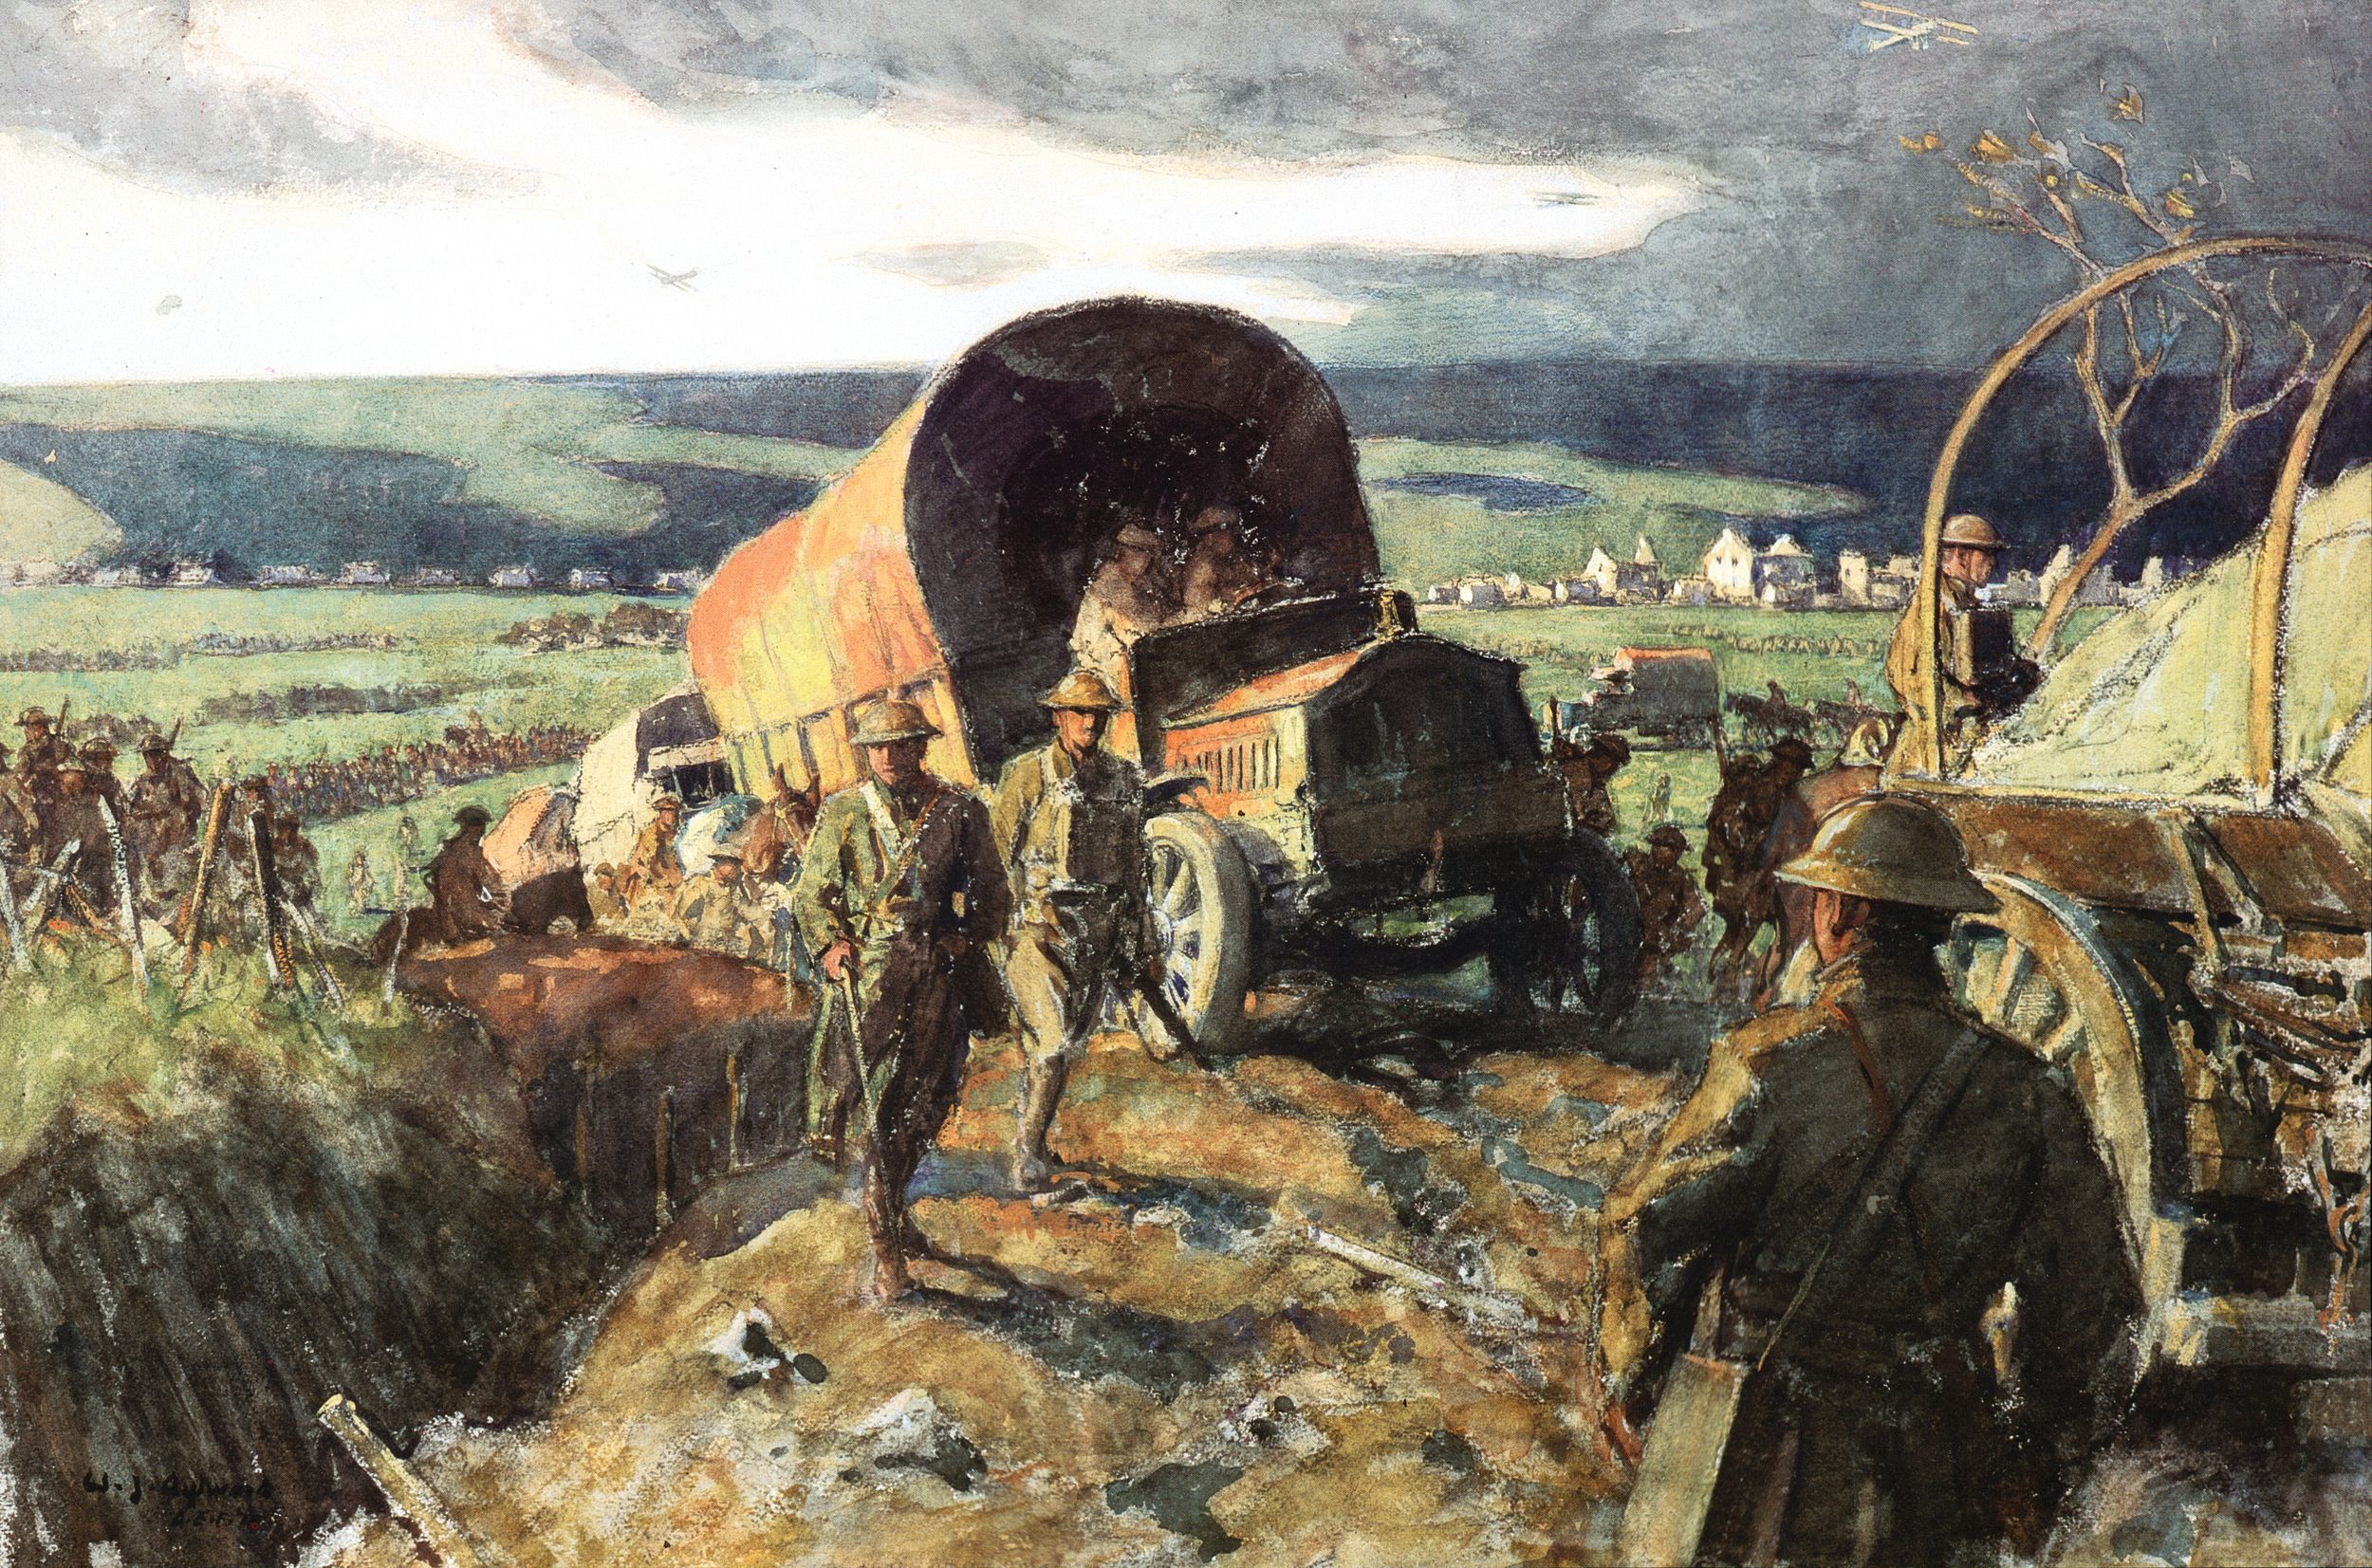 A seemingly endless procession of trucks brings American soldiers and supplies to the front at Chateau-Thierry in May 1918. Painting by William James Aylward.